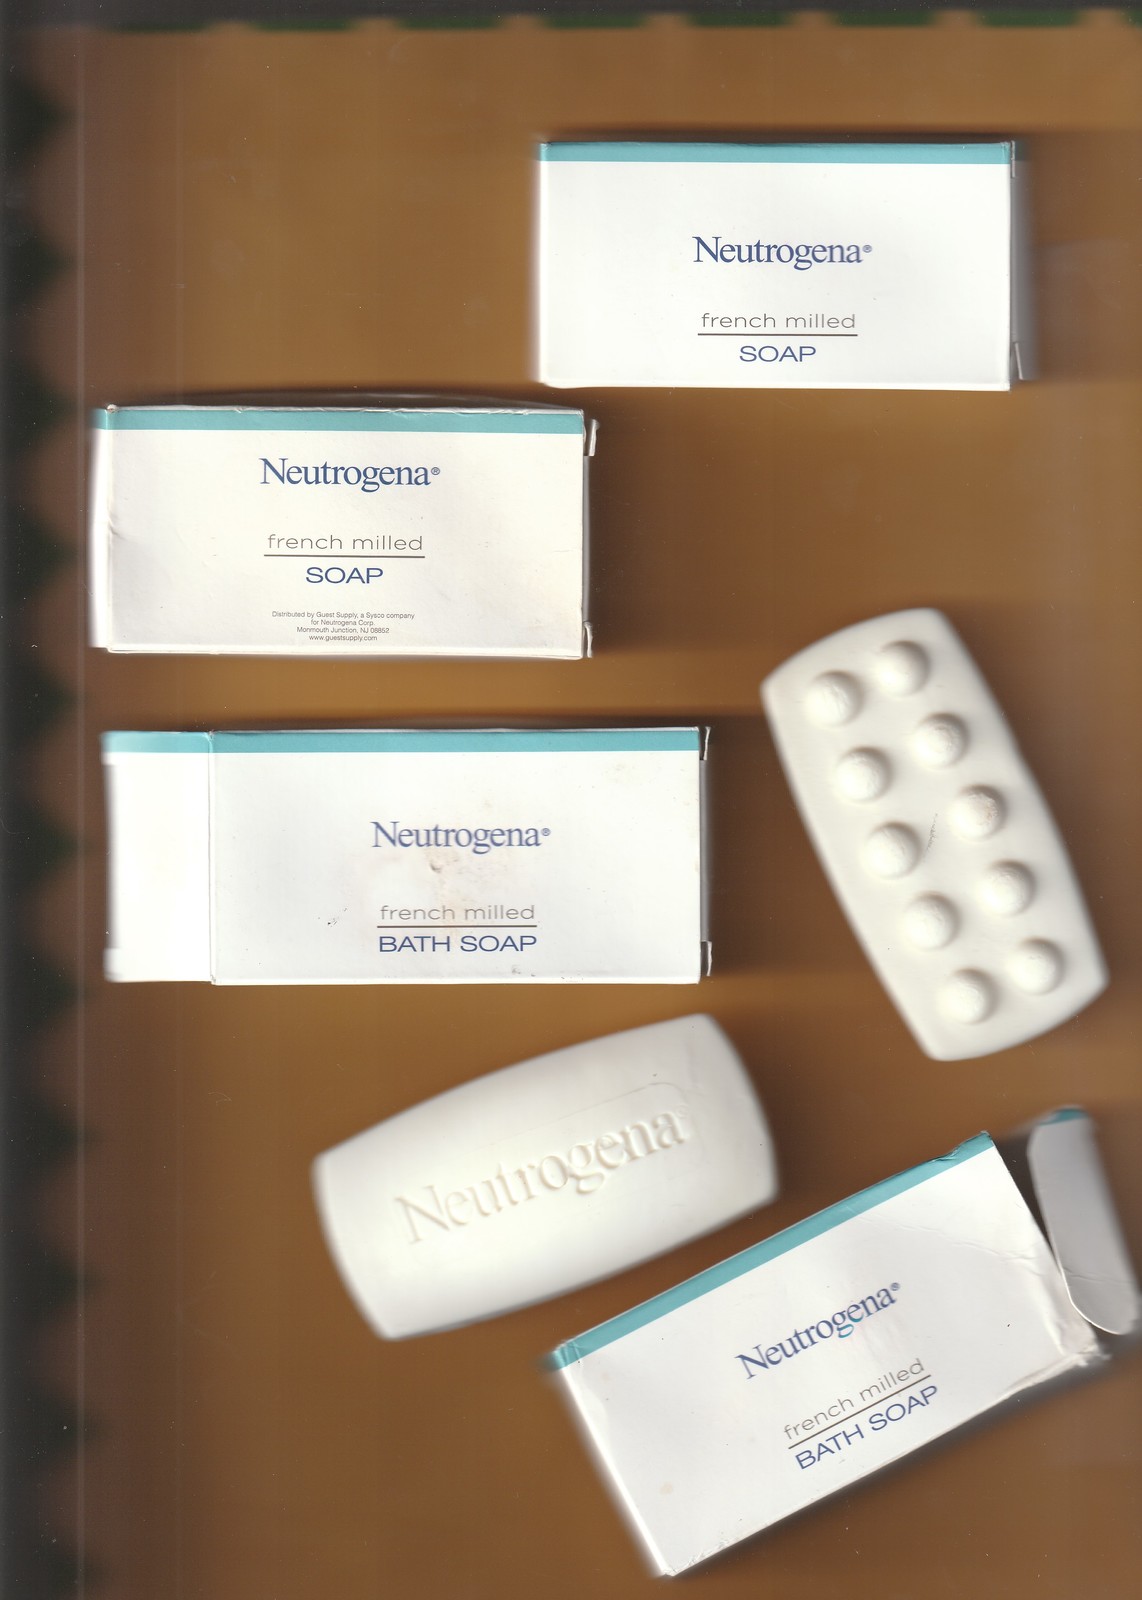 Neutrogena French Milled Bath Soap 4-count Massaging BARS inside Boxes - New - $11.00